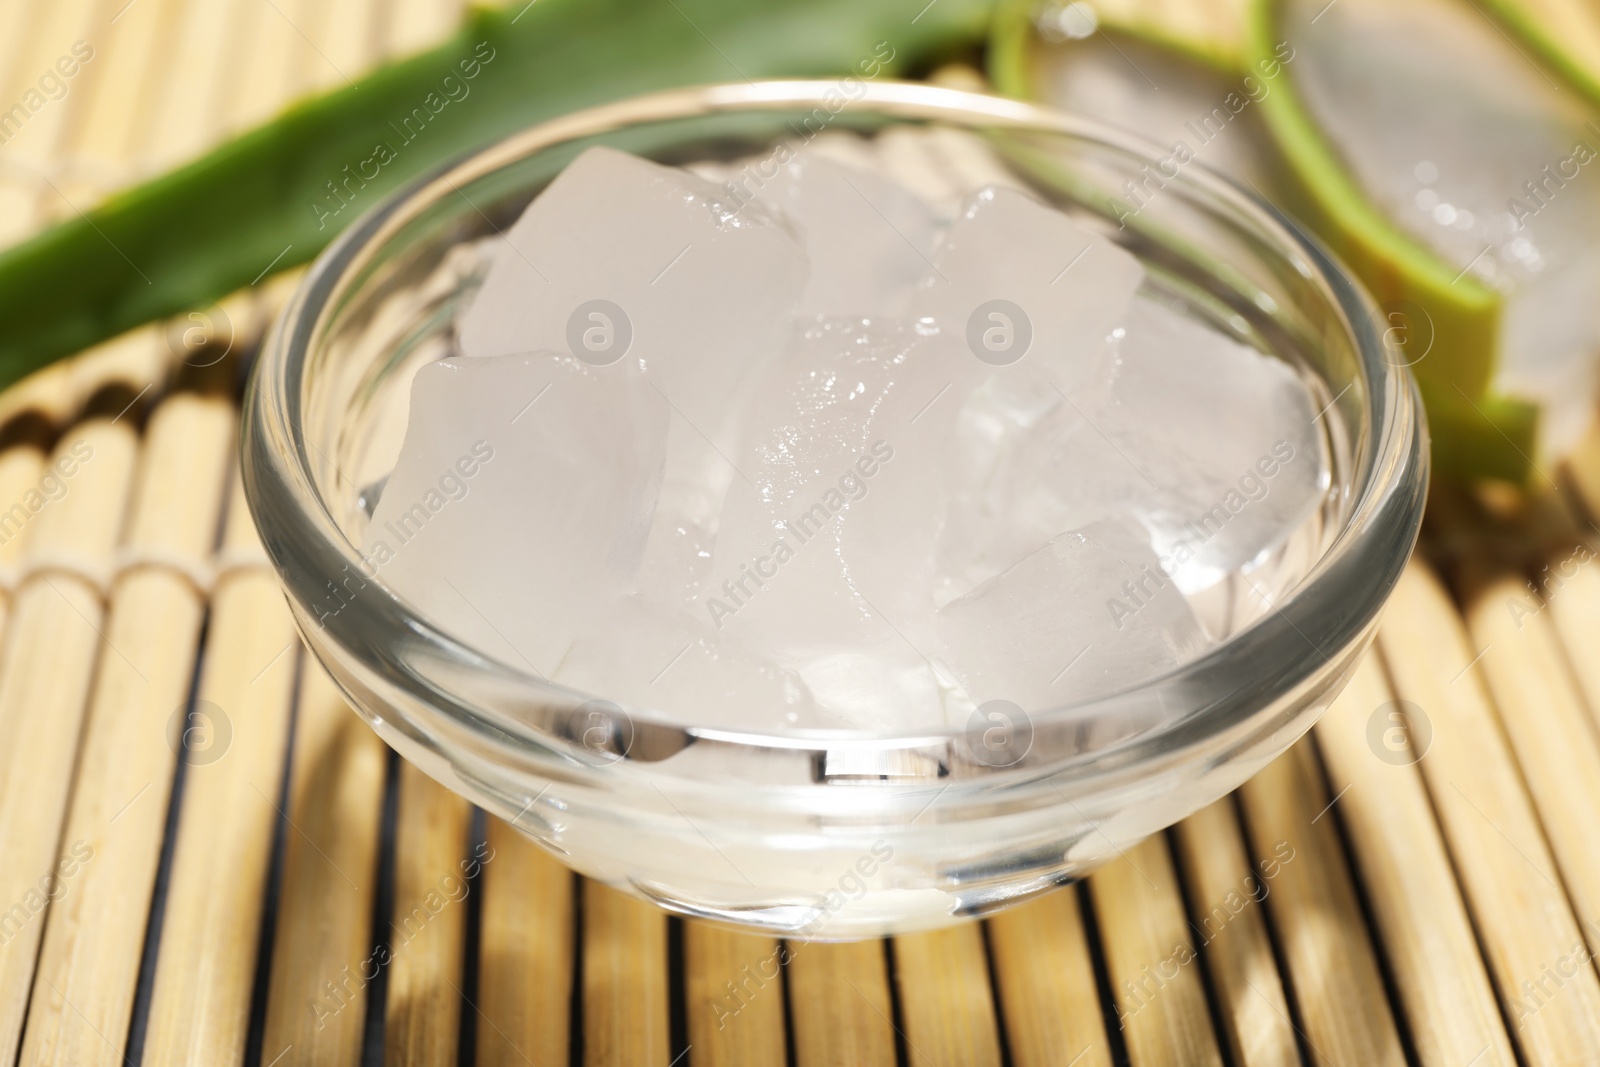 Photo of Aloe vera gel and slices of plant on bamboo mat, closeup